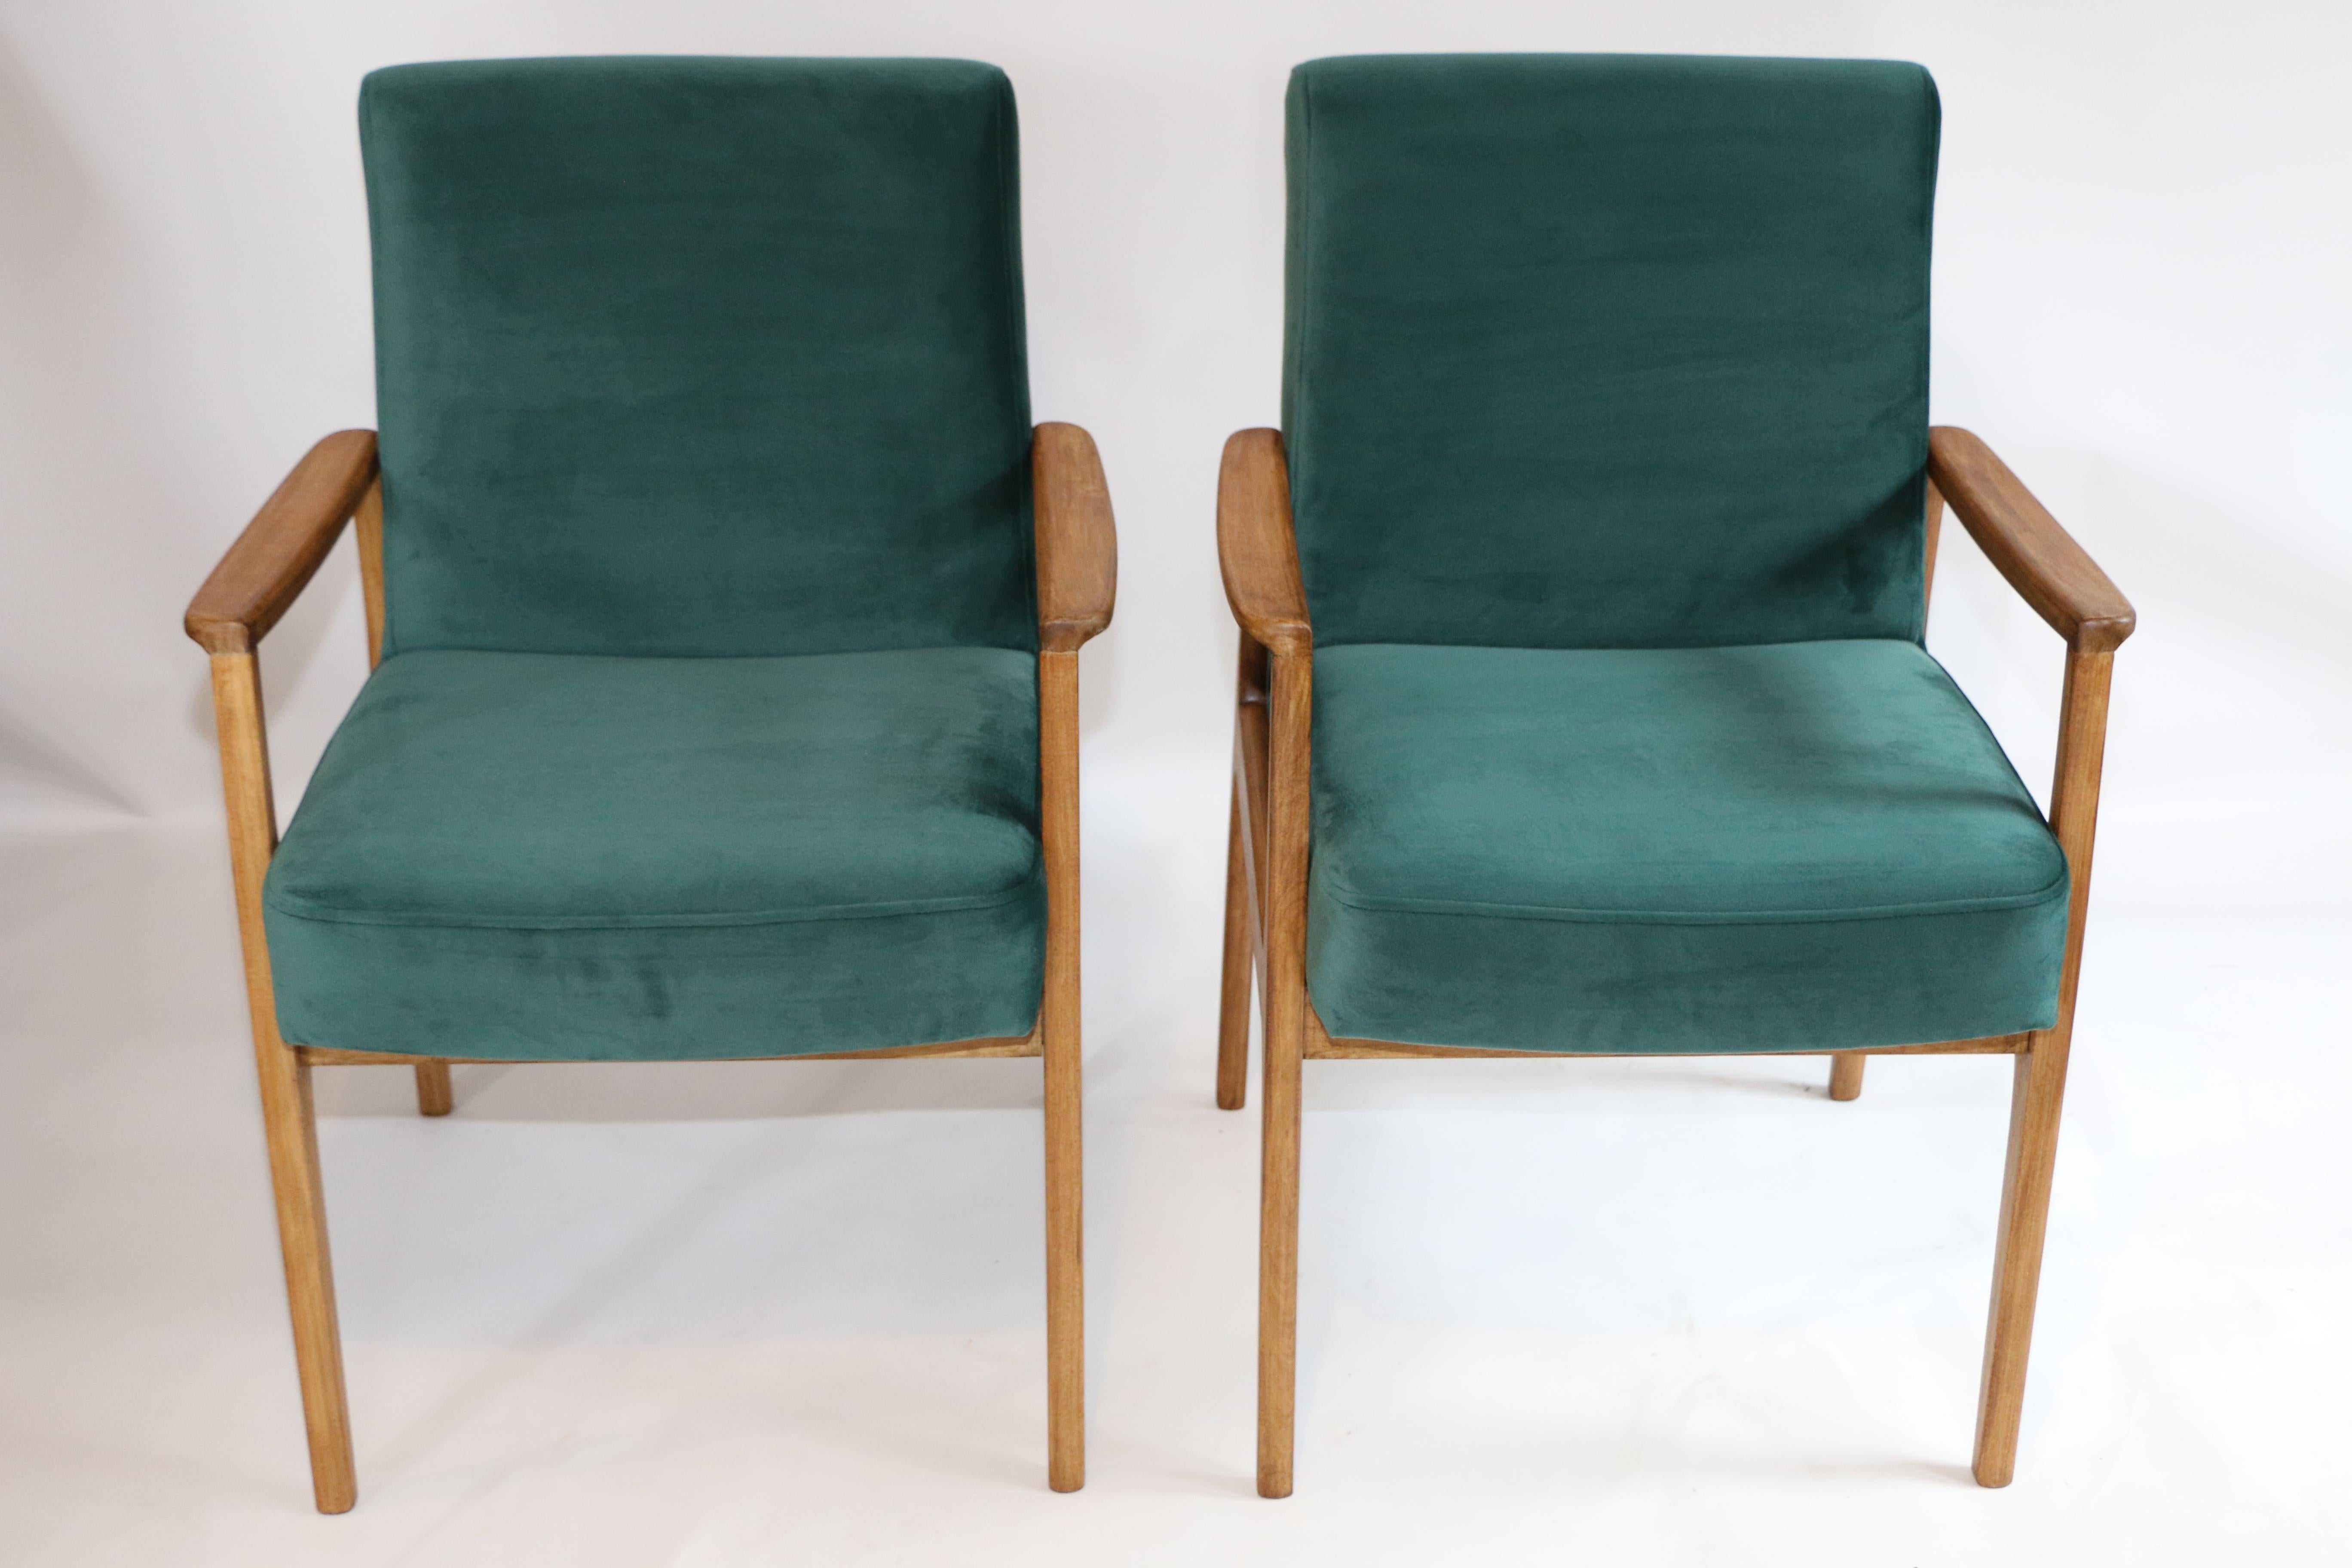 Woodwork Pair of Chairs in Green Velvet from 20th Century For Sale